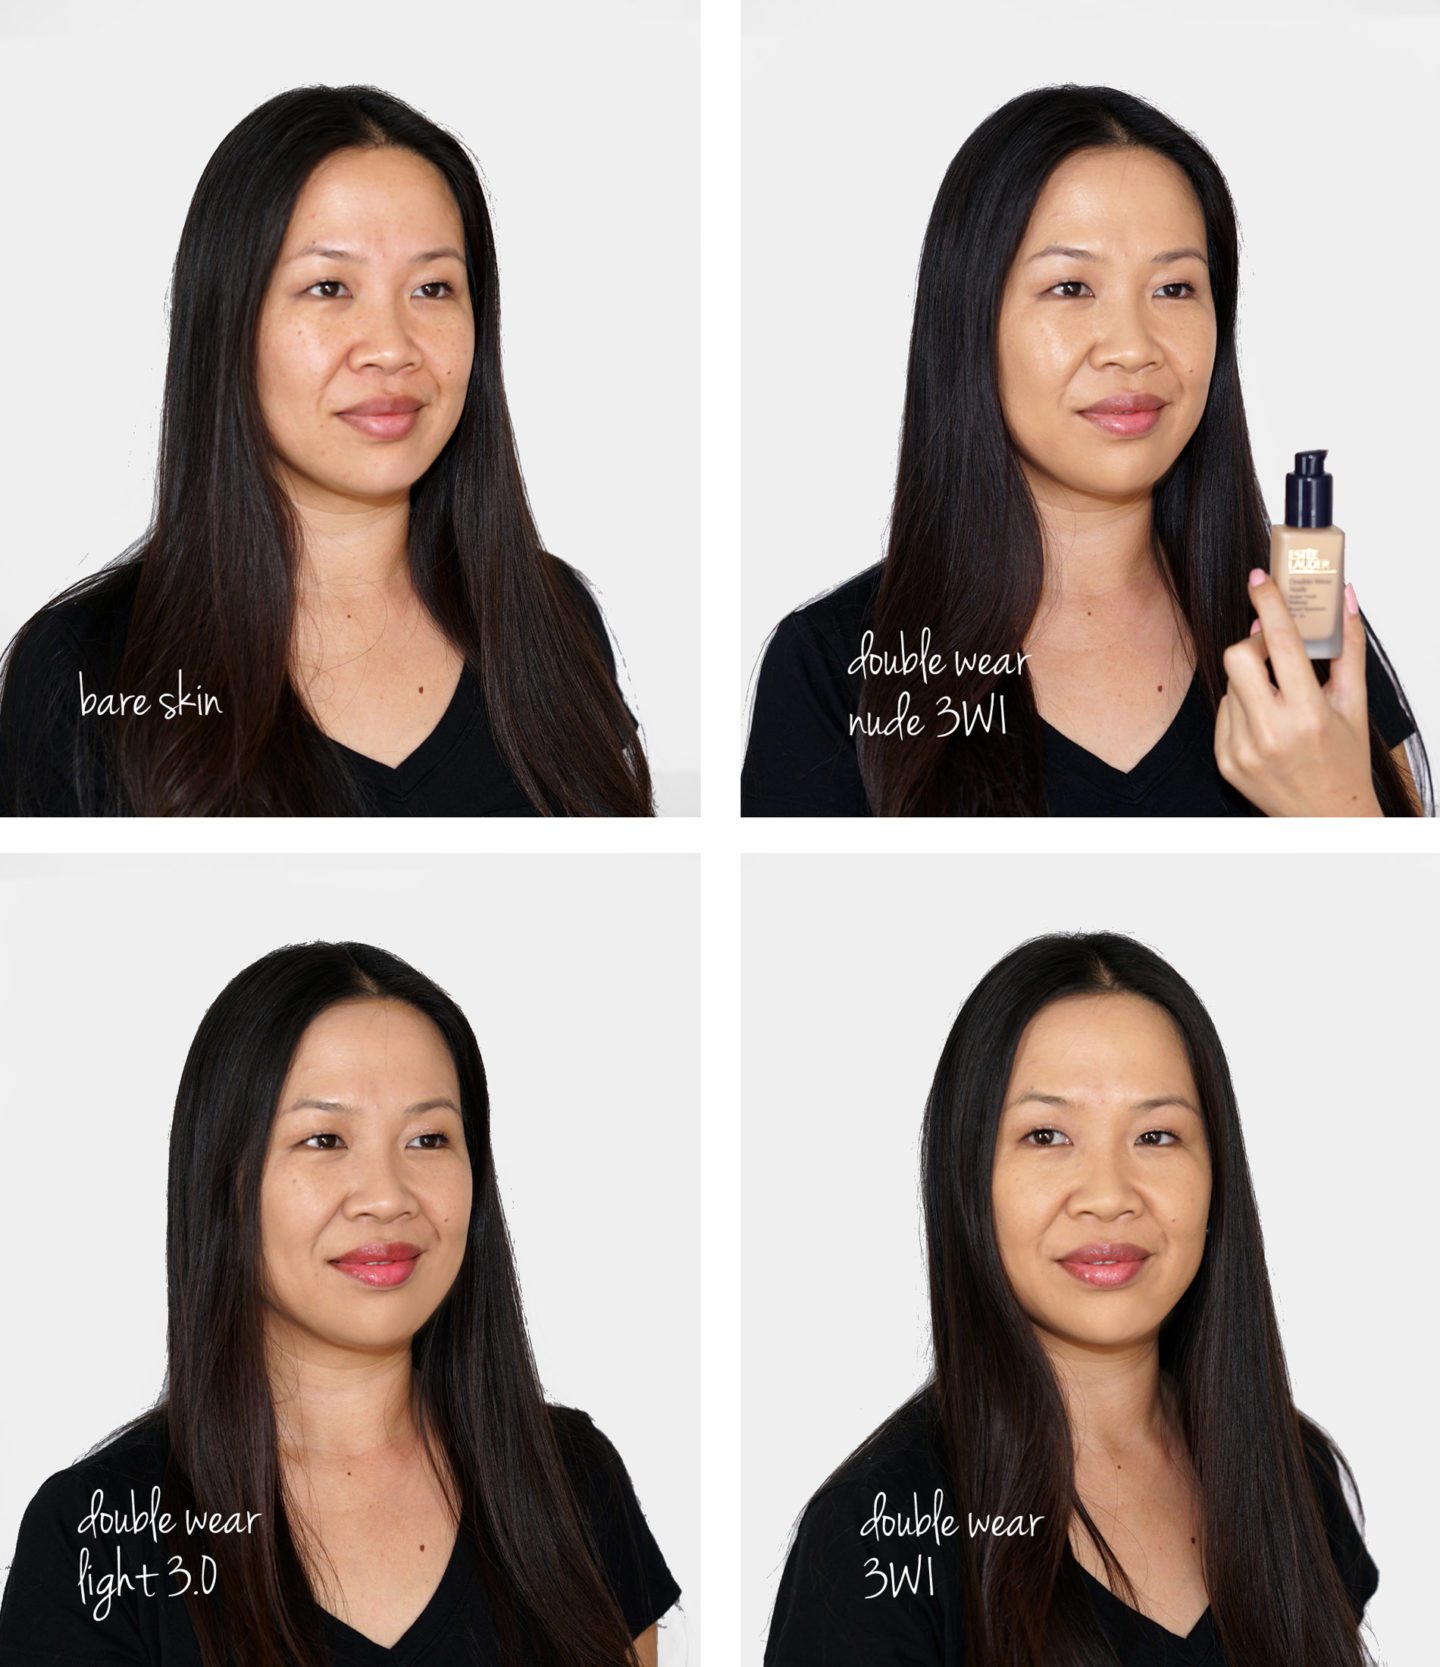 Estee Lauder Double Wear Foundation swatches | The Beauty Look Book